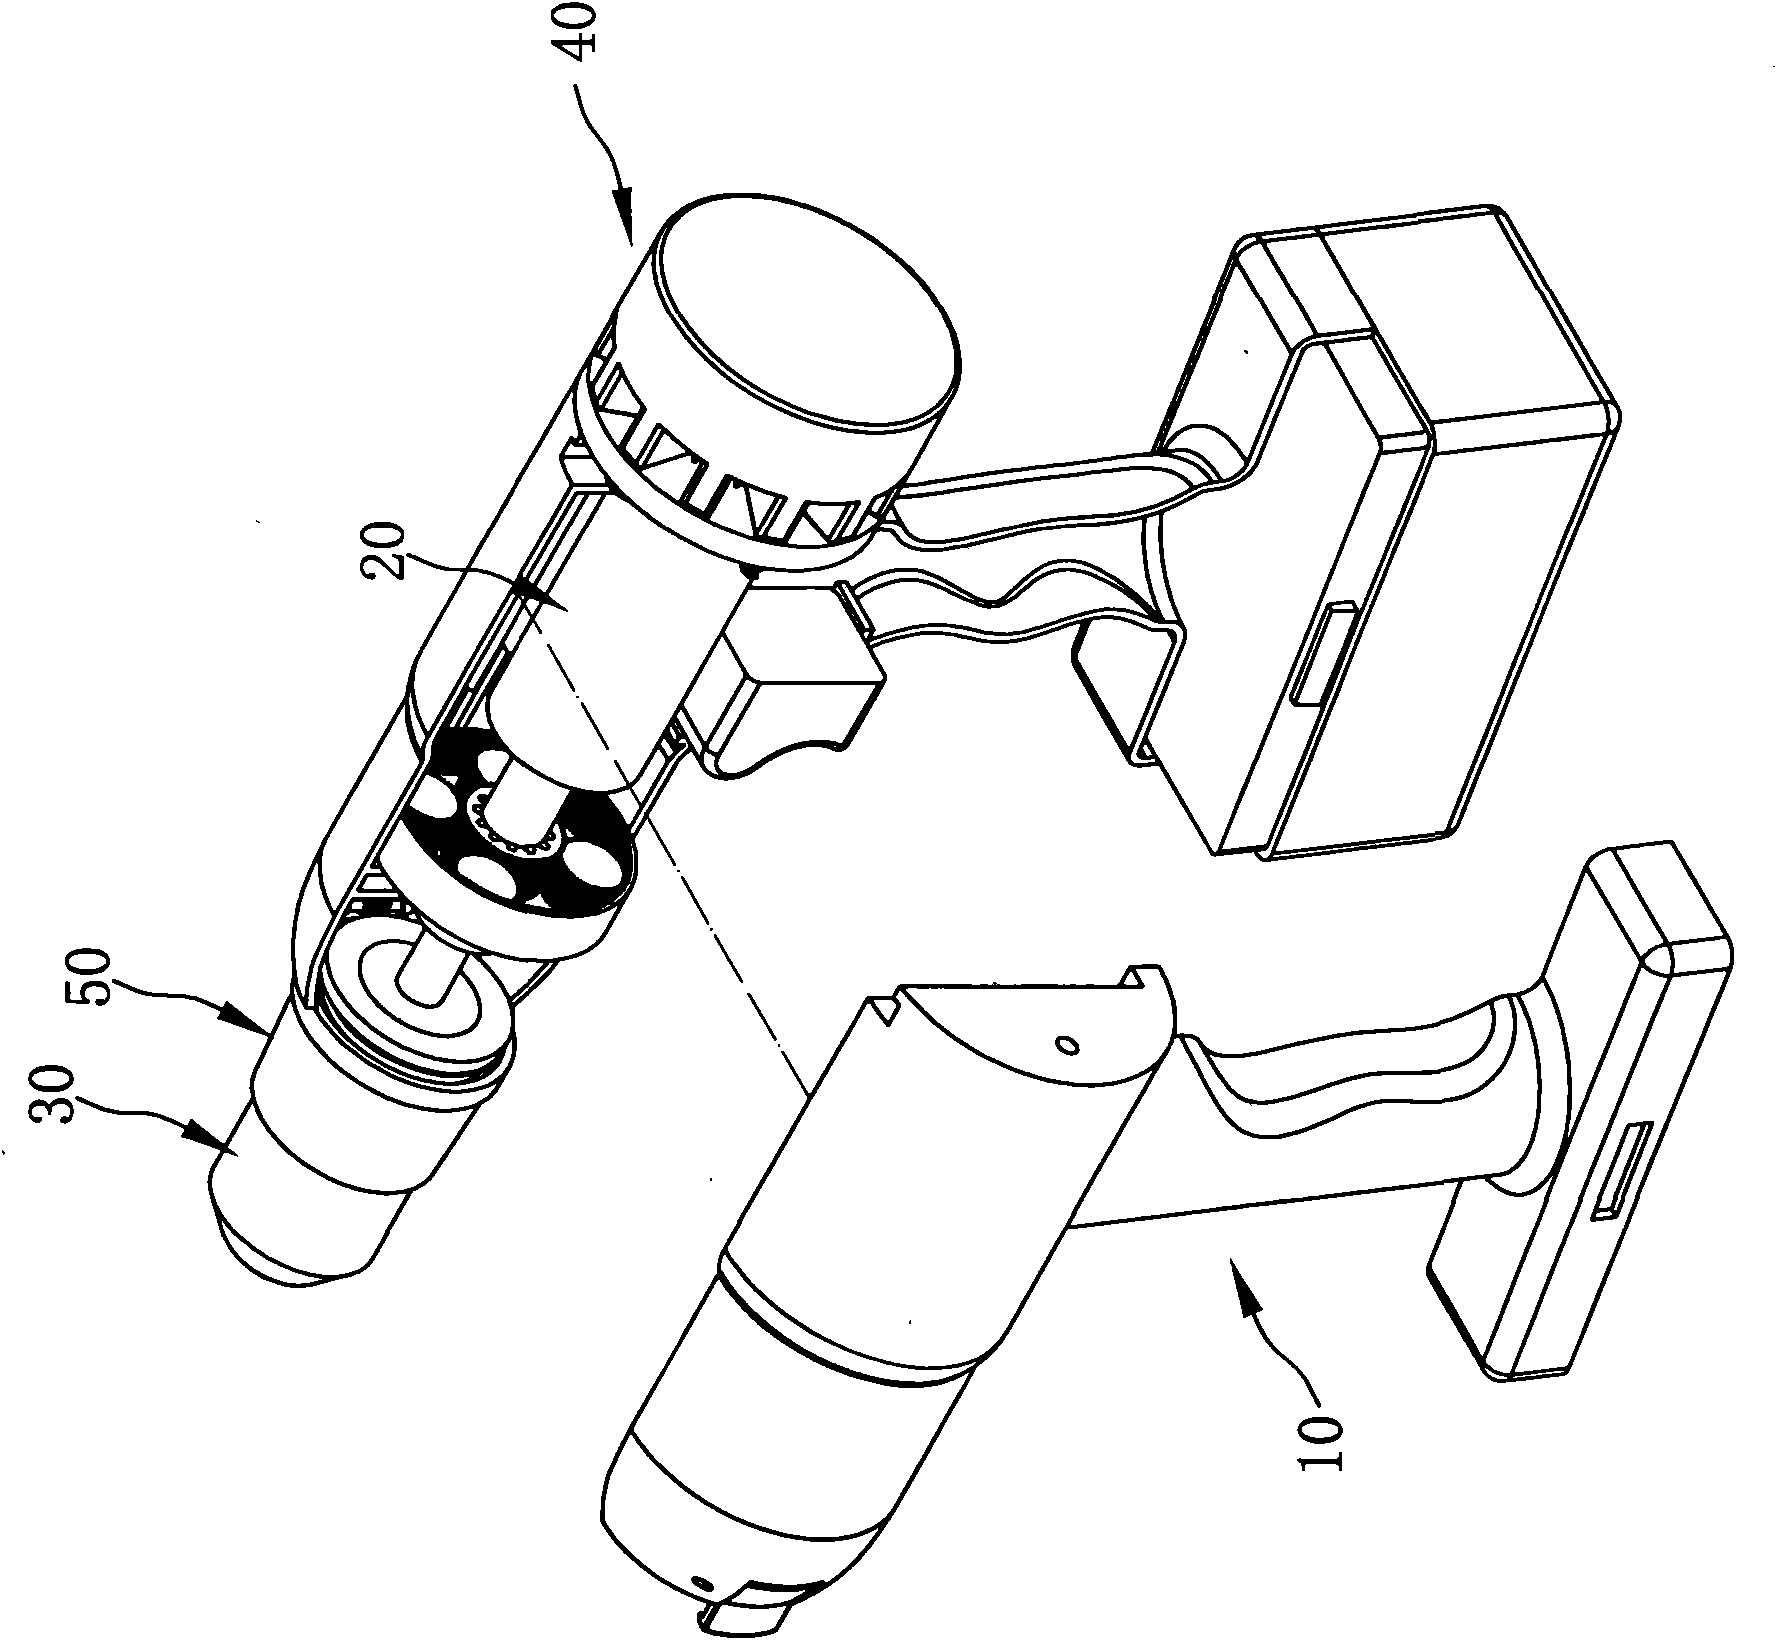 Power tool with slidable storage device